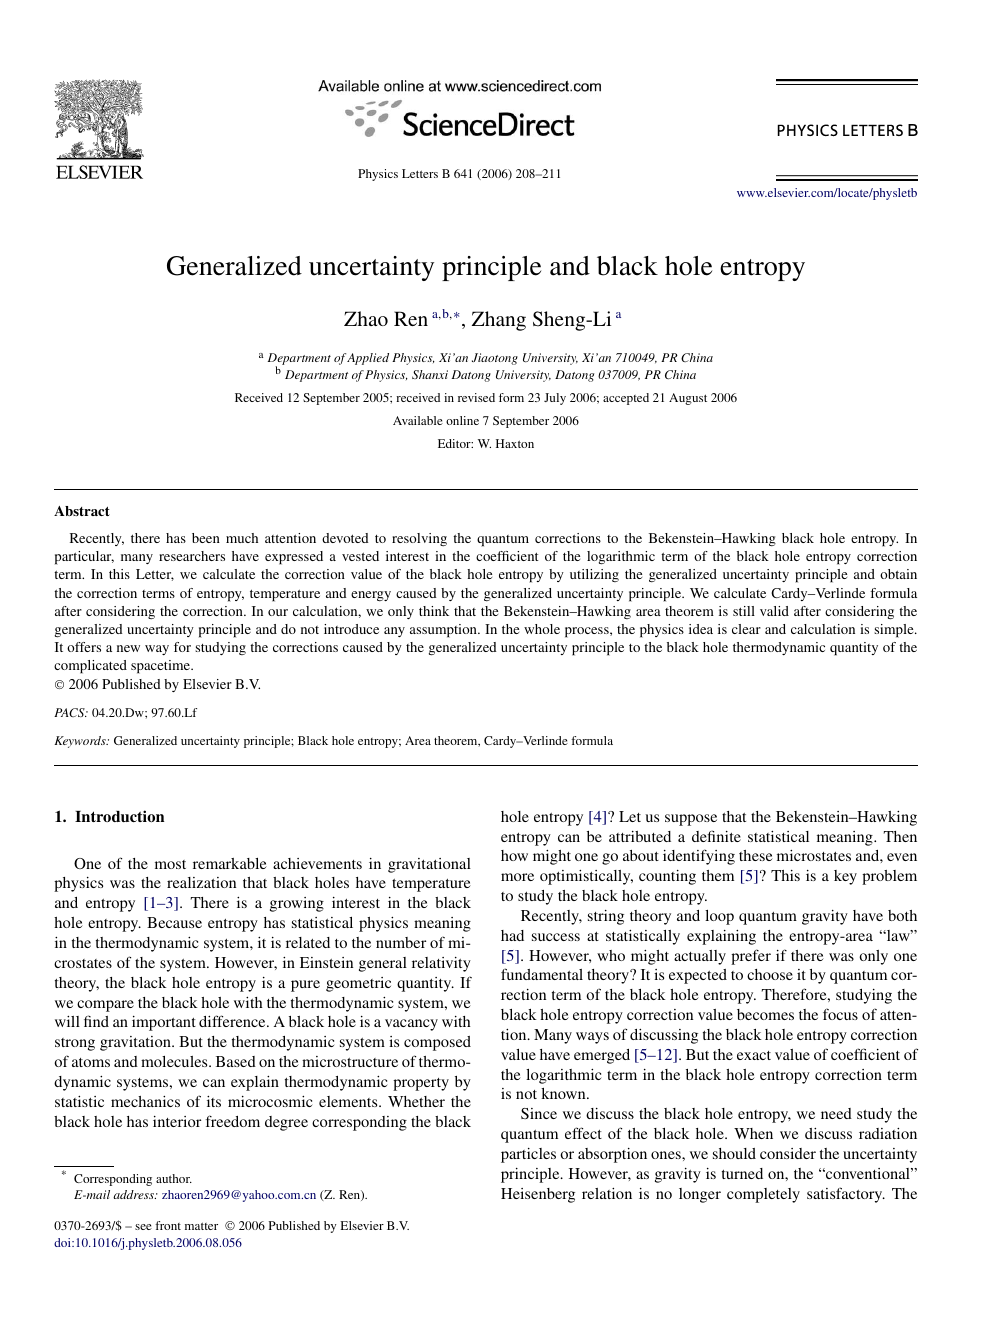 Generalized Uncertainty Principle And Black Hole Entropy Topic Of Research Paper In Physical Sciences Download Scholarly Article Pdf And Read For Free On Cyberleninka Open Science Hub